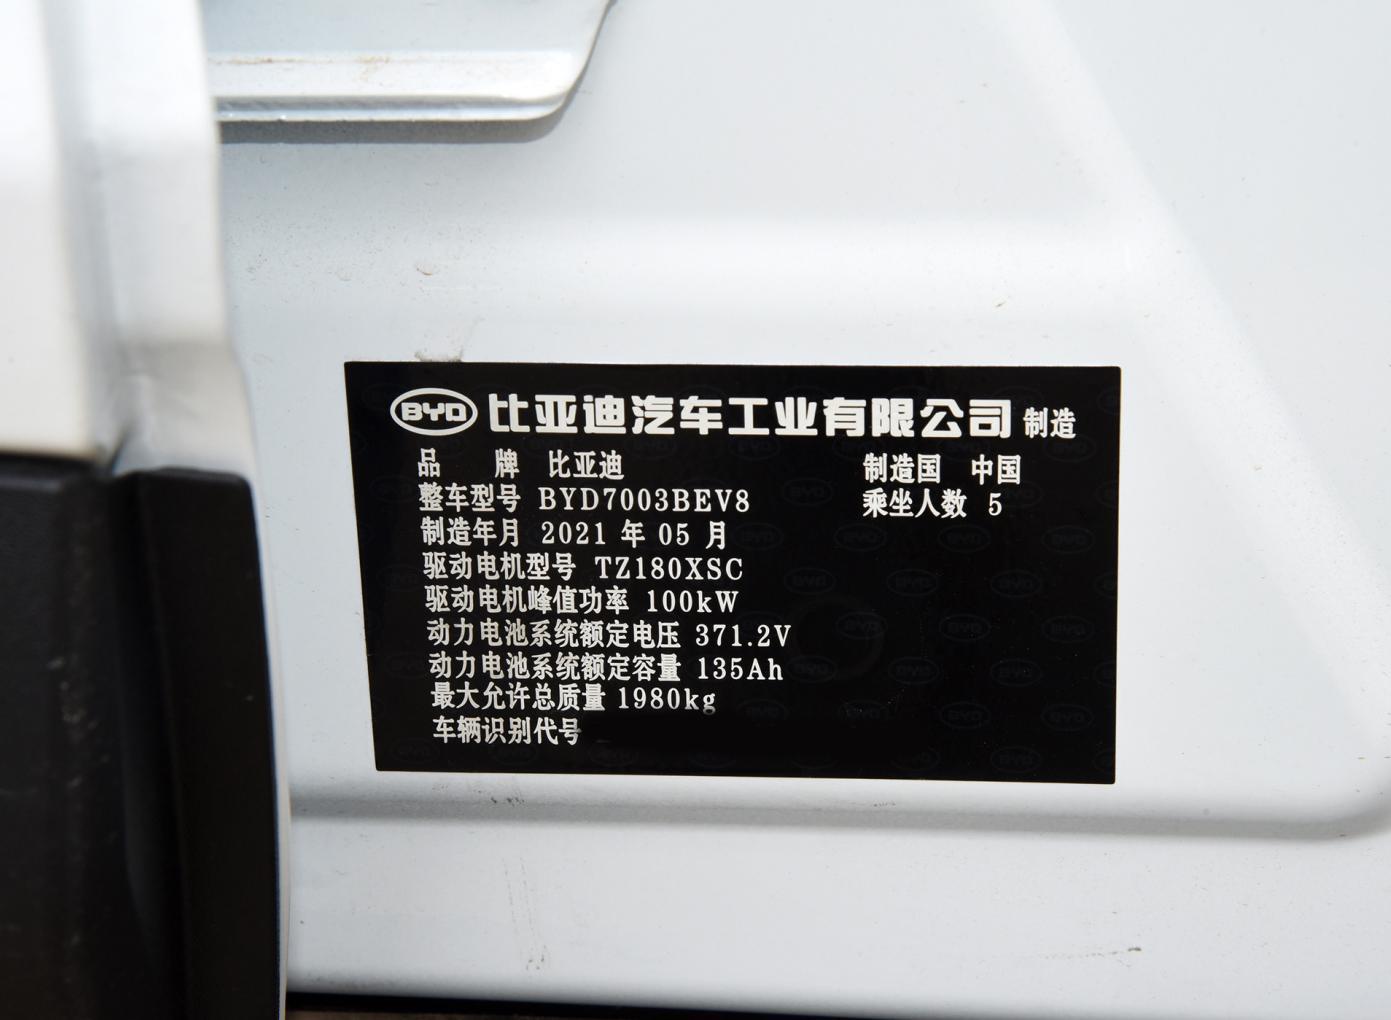 BYD Yuan Pro electric vehicles 2022